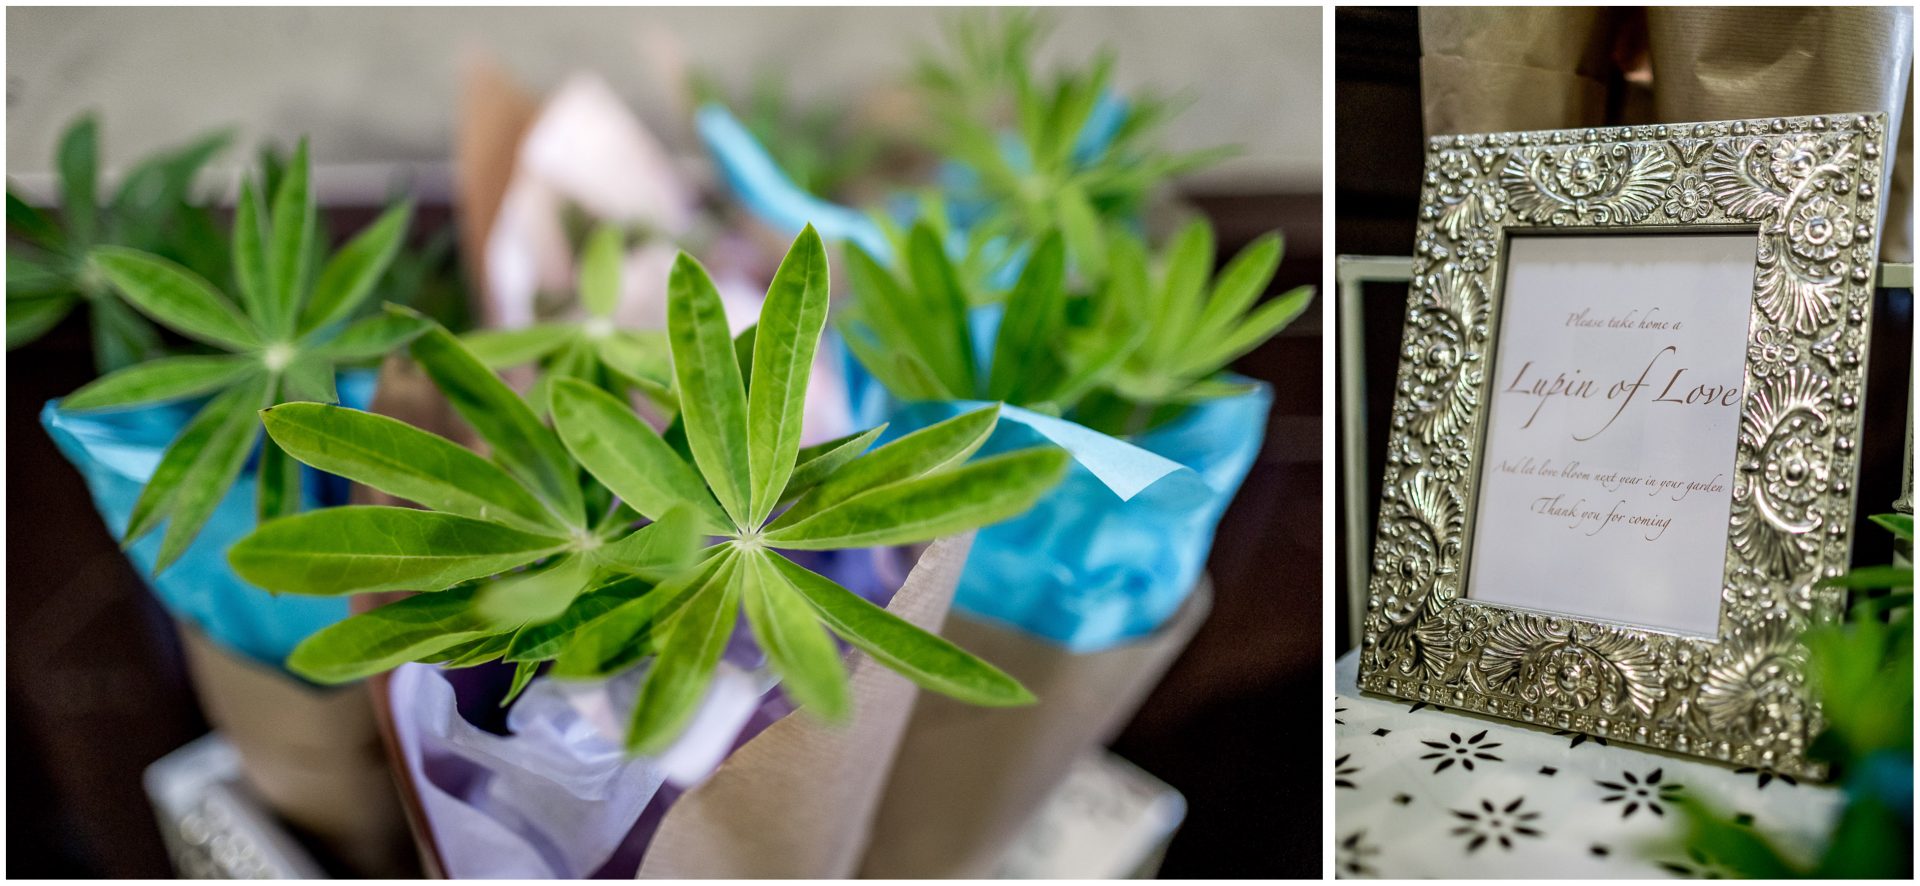 Lupins as wedding favours